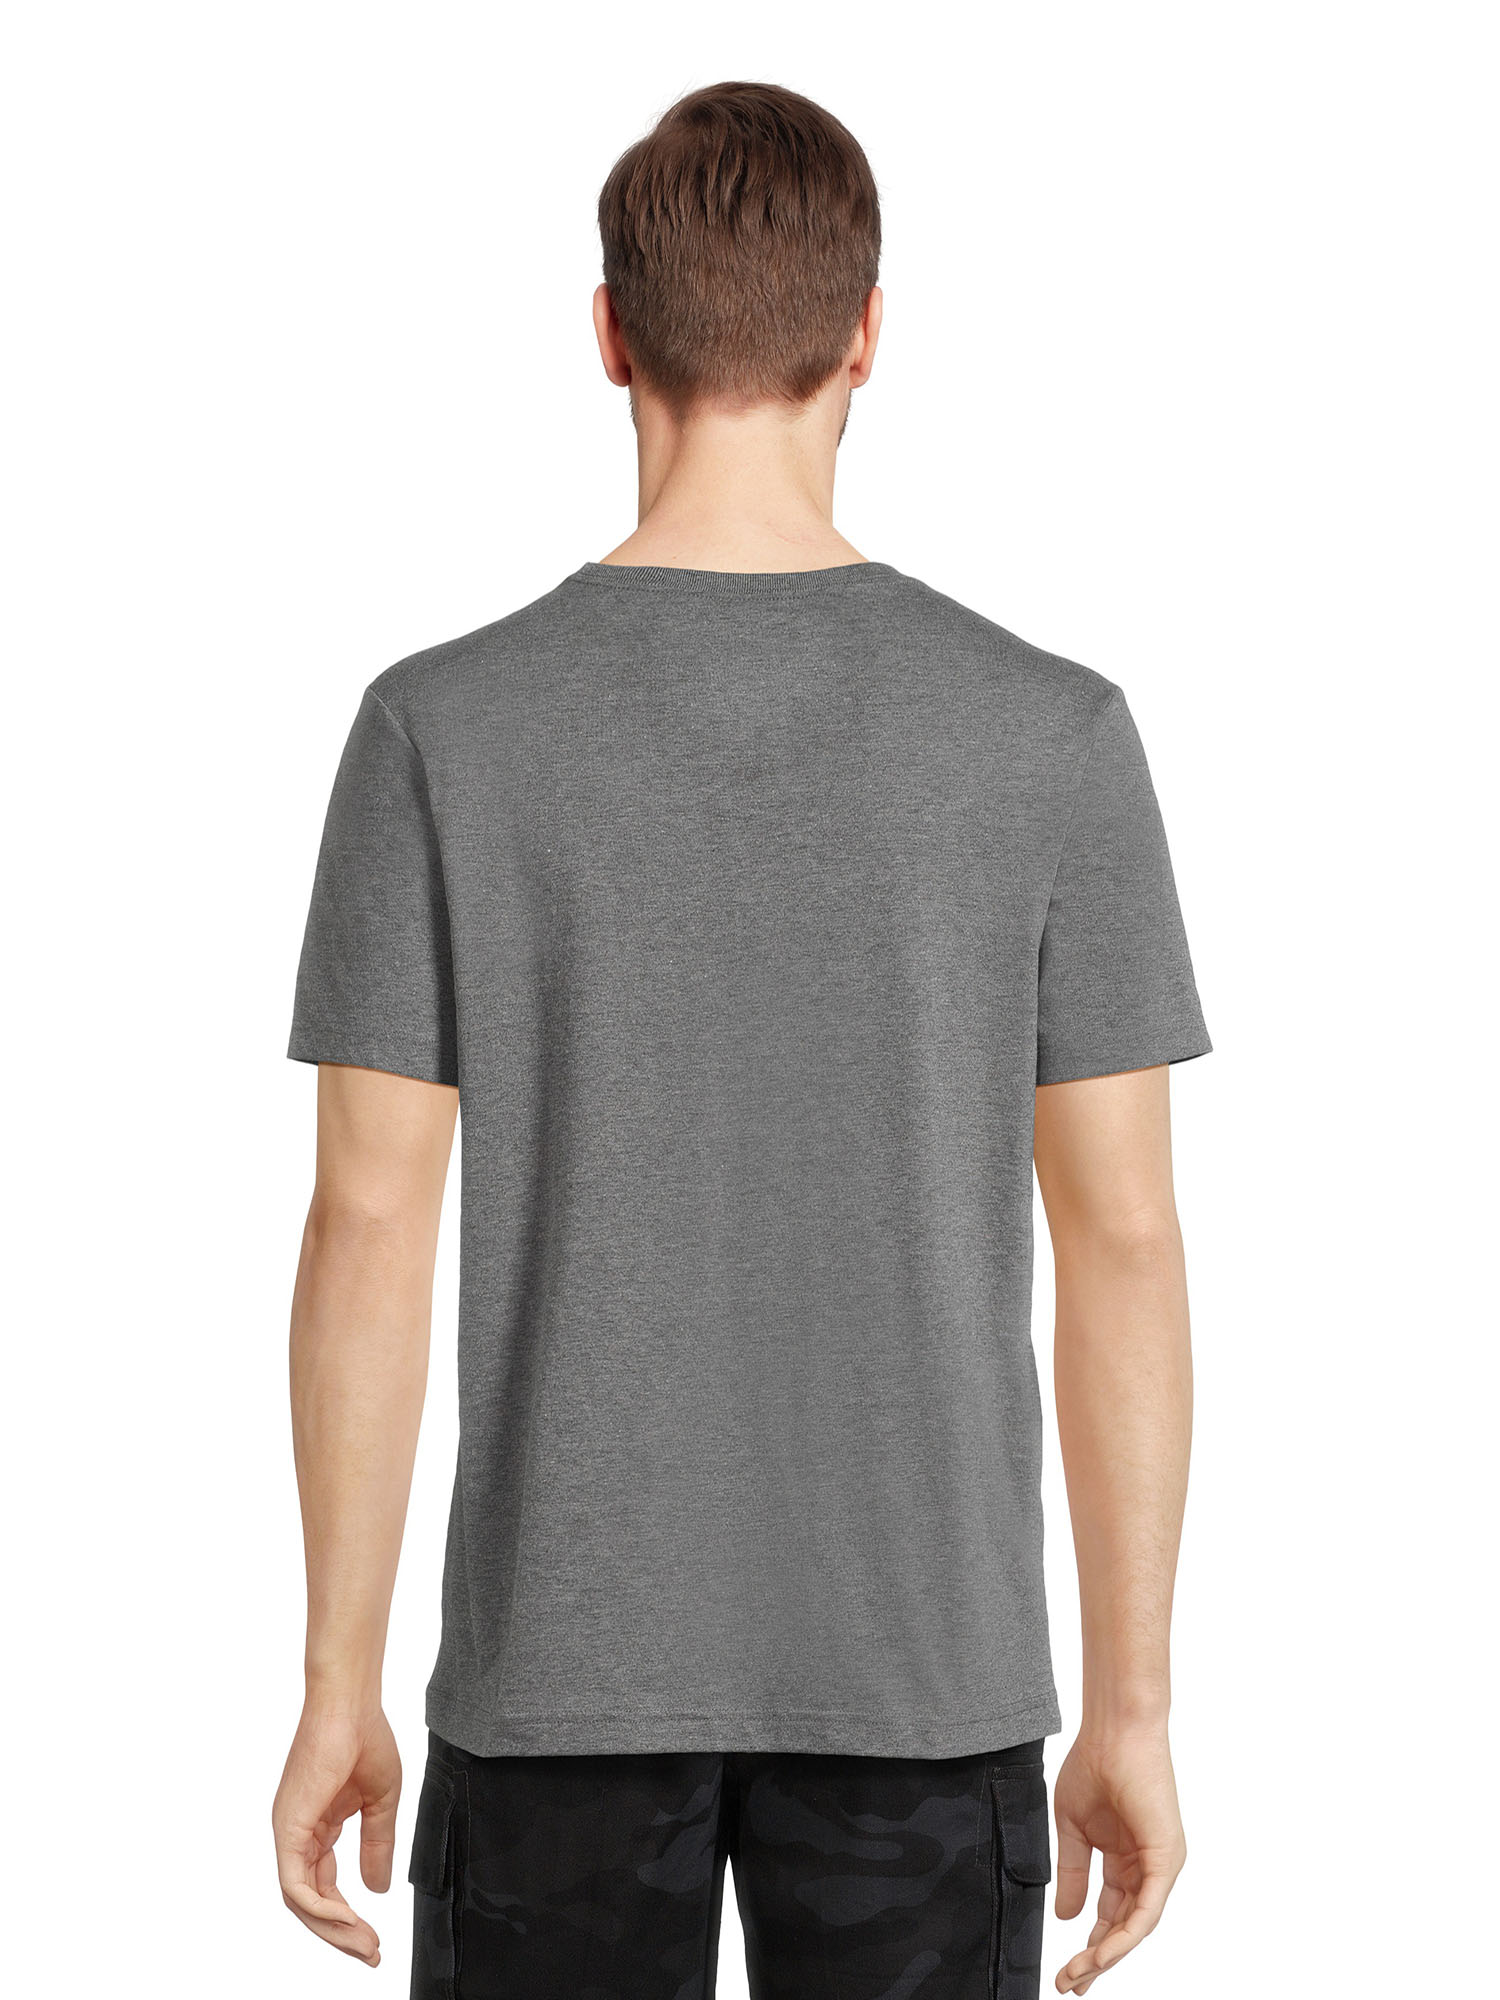 George Men's & Big Men's Crewneck Tee with Short Sleeves, Sizes XS-3XL - image 3 of 5